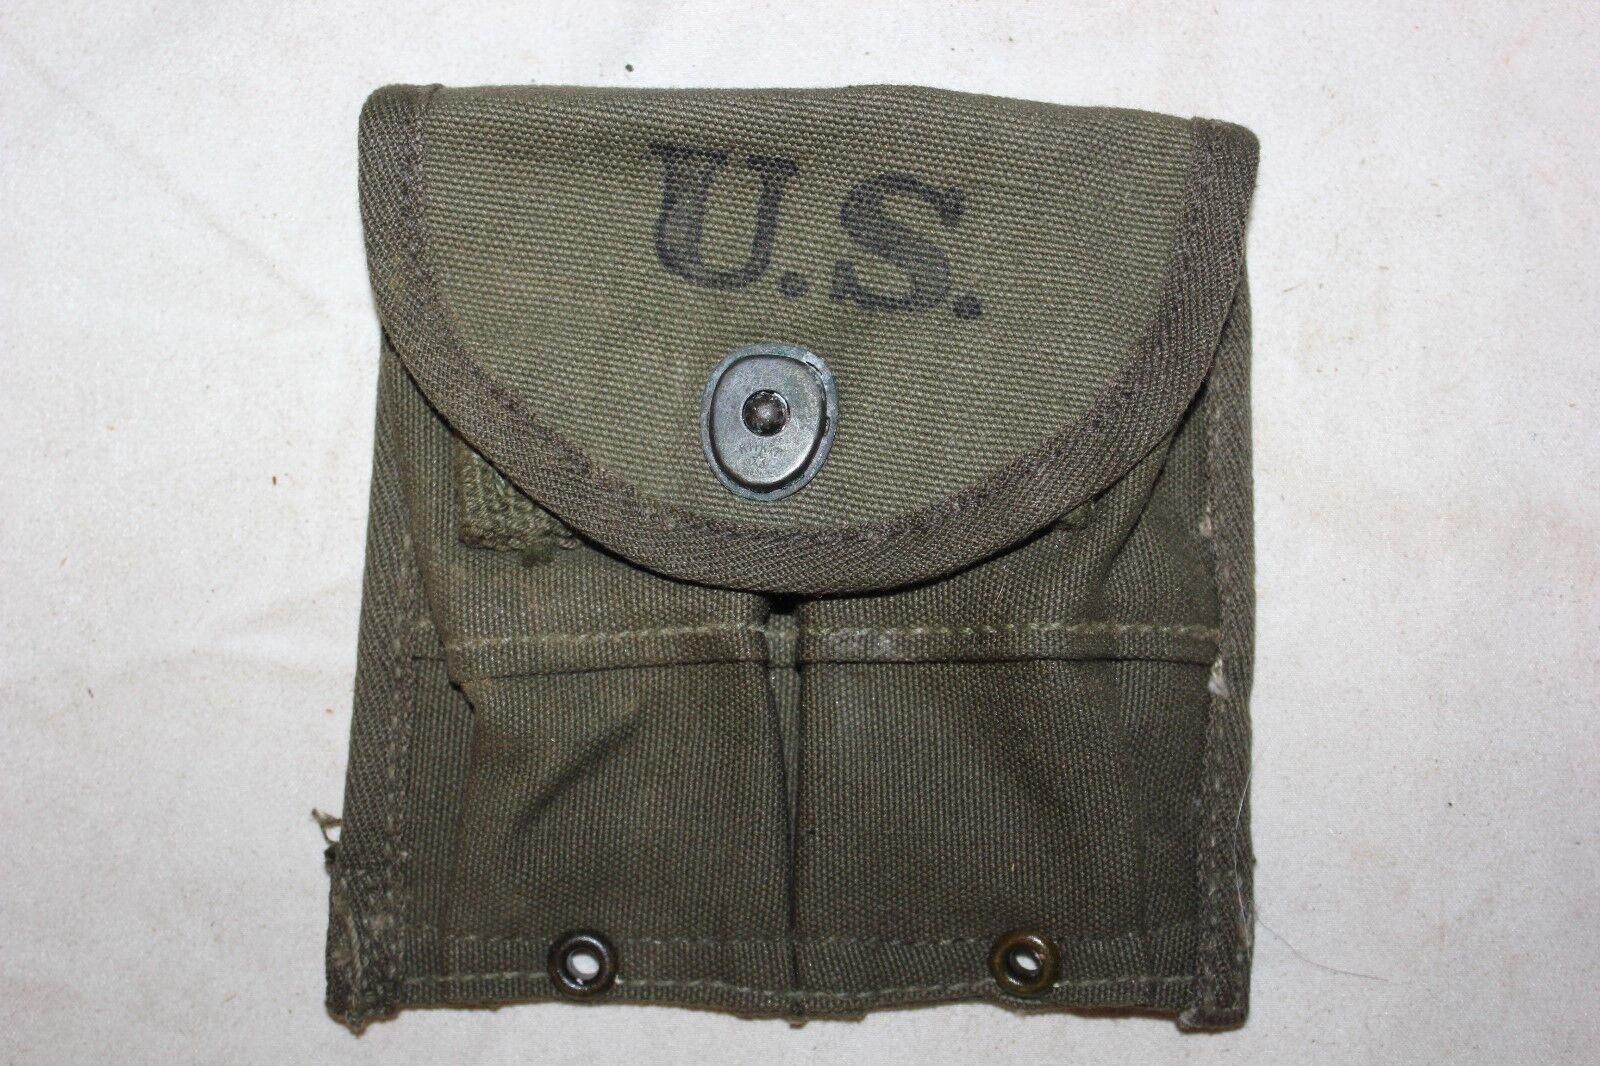 1 US Military Issue GI WW2 AVERY 1945 M1 Magazine Pouch NOS